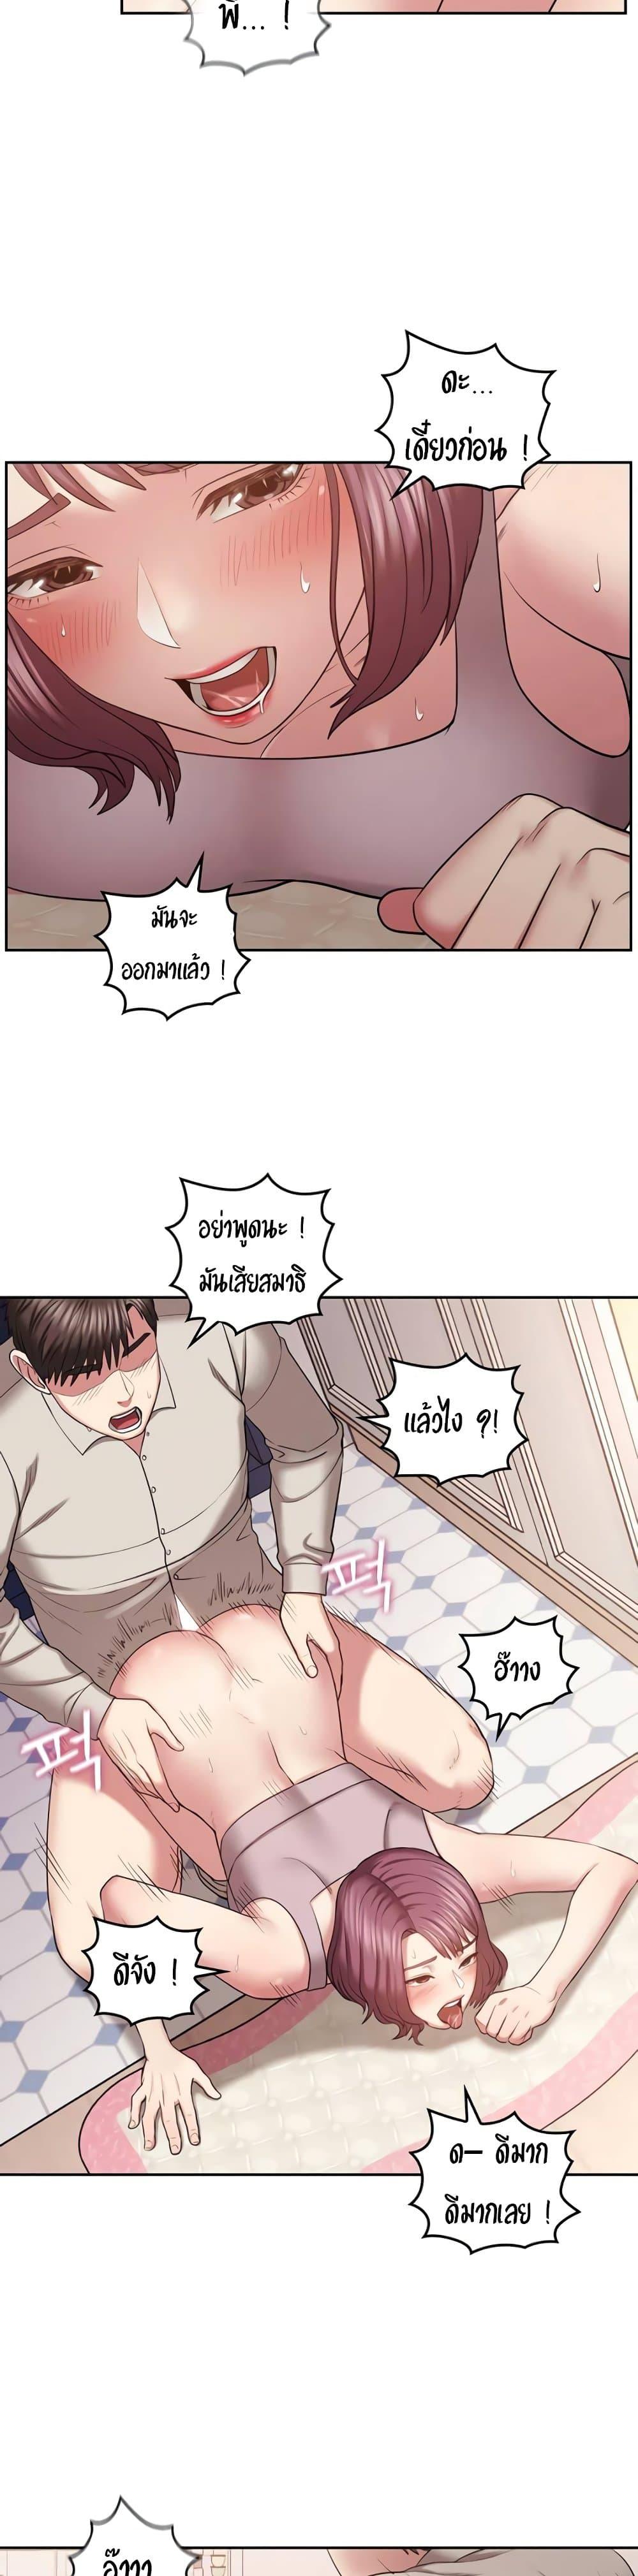 Sexual Consulting 2 ภาพ 32